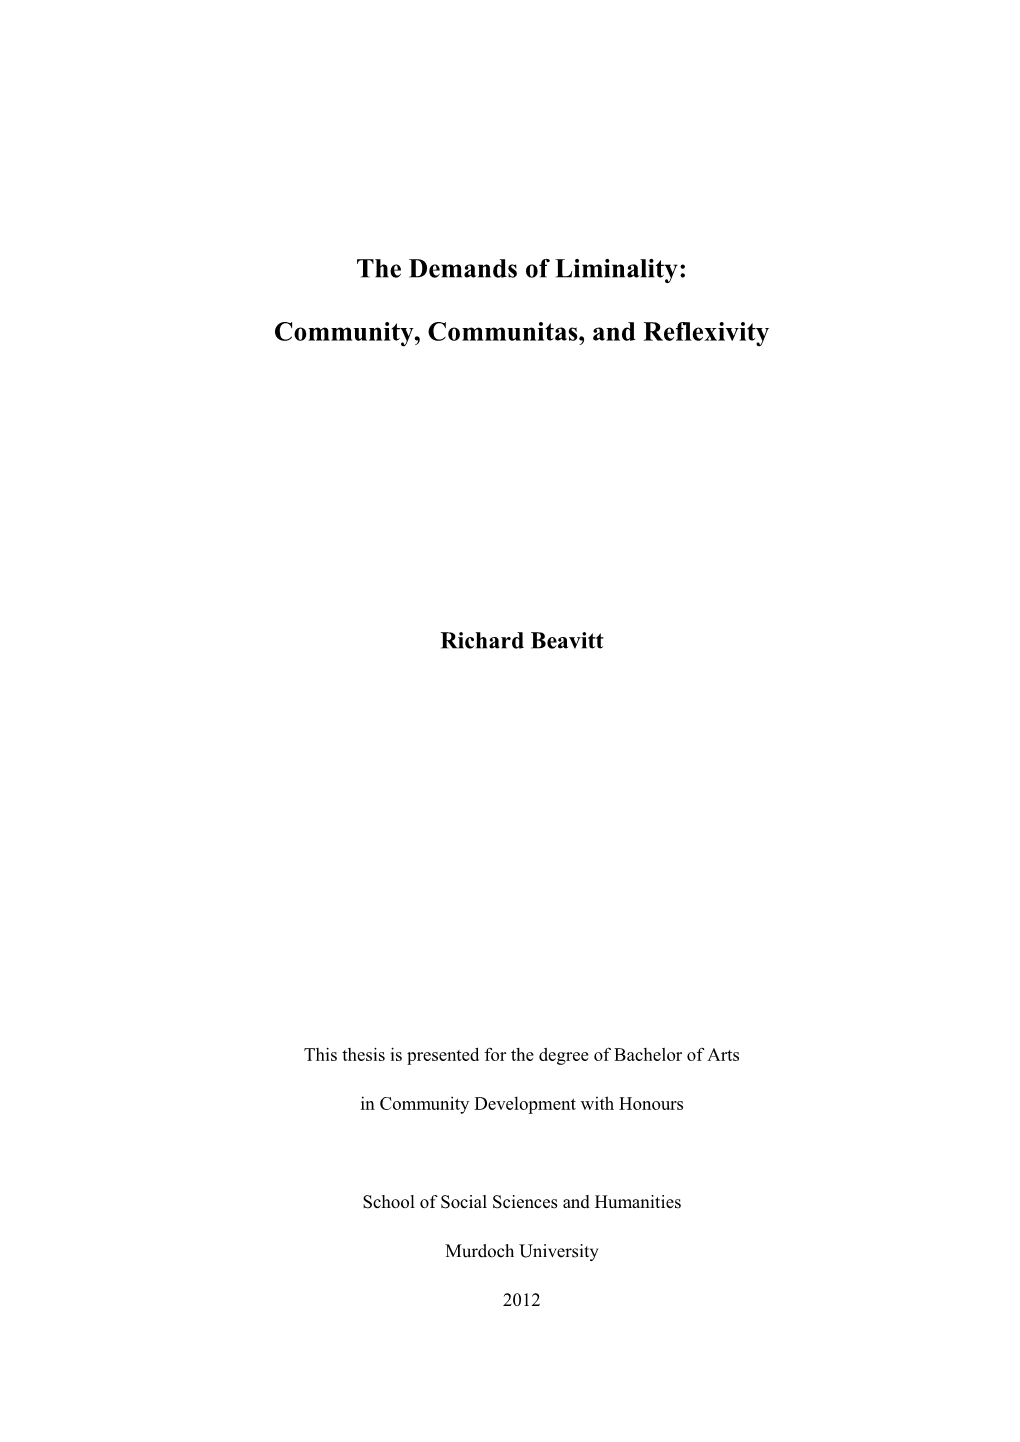 The Demands of Liminality: Community, Communitas, And